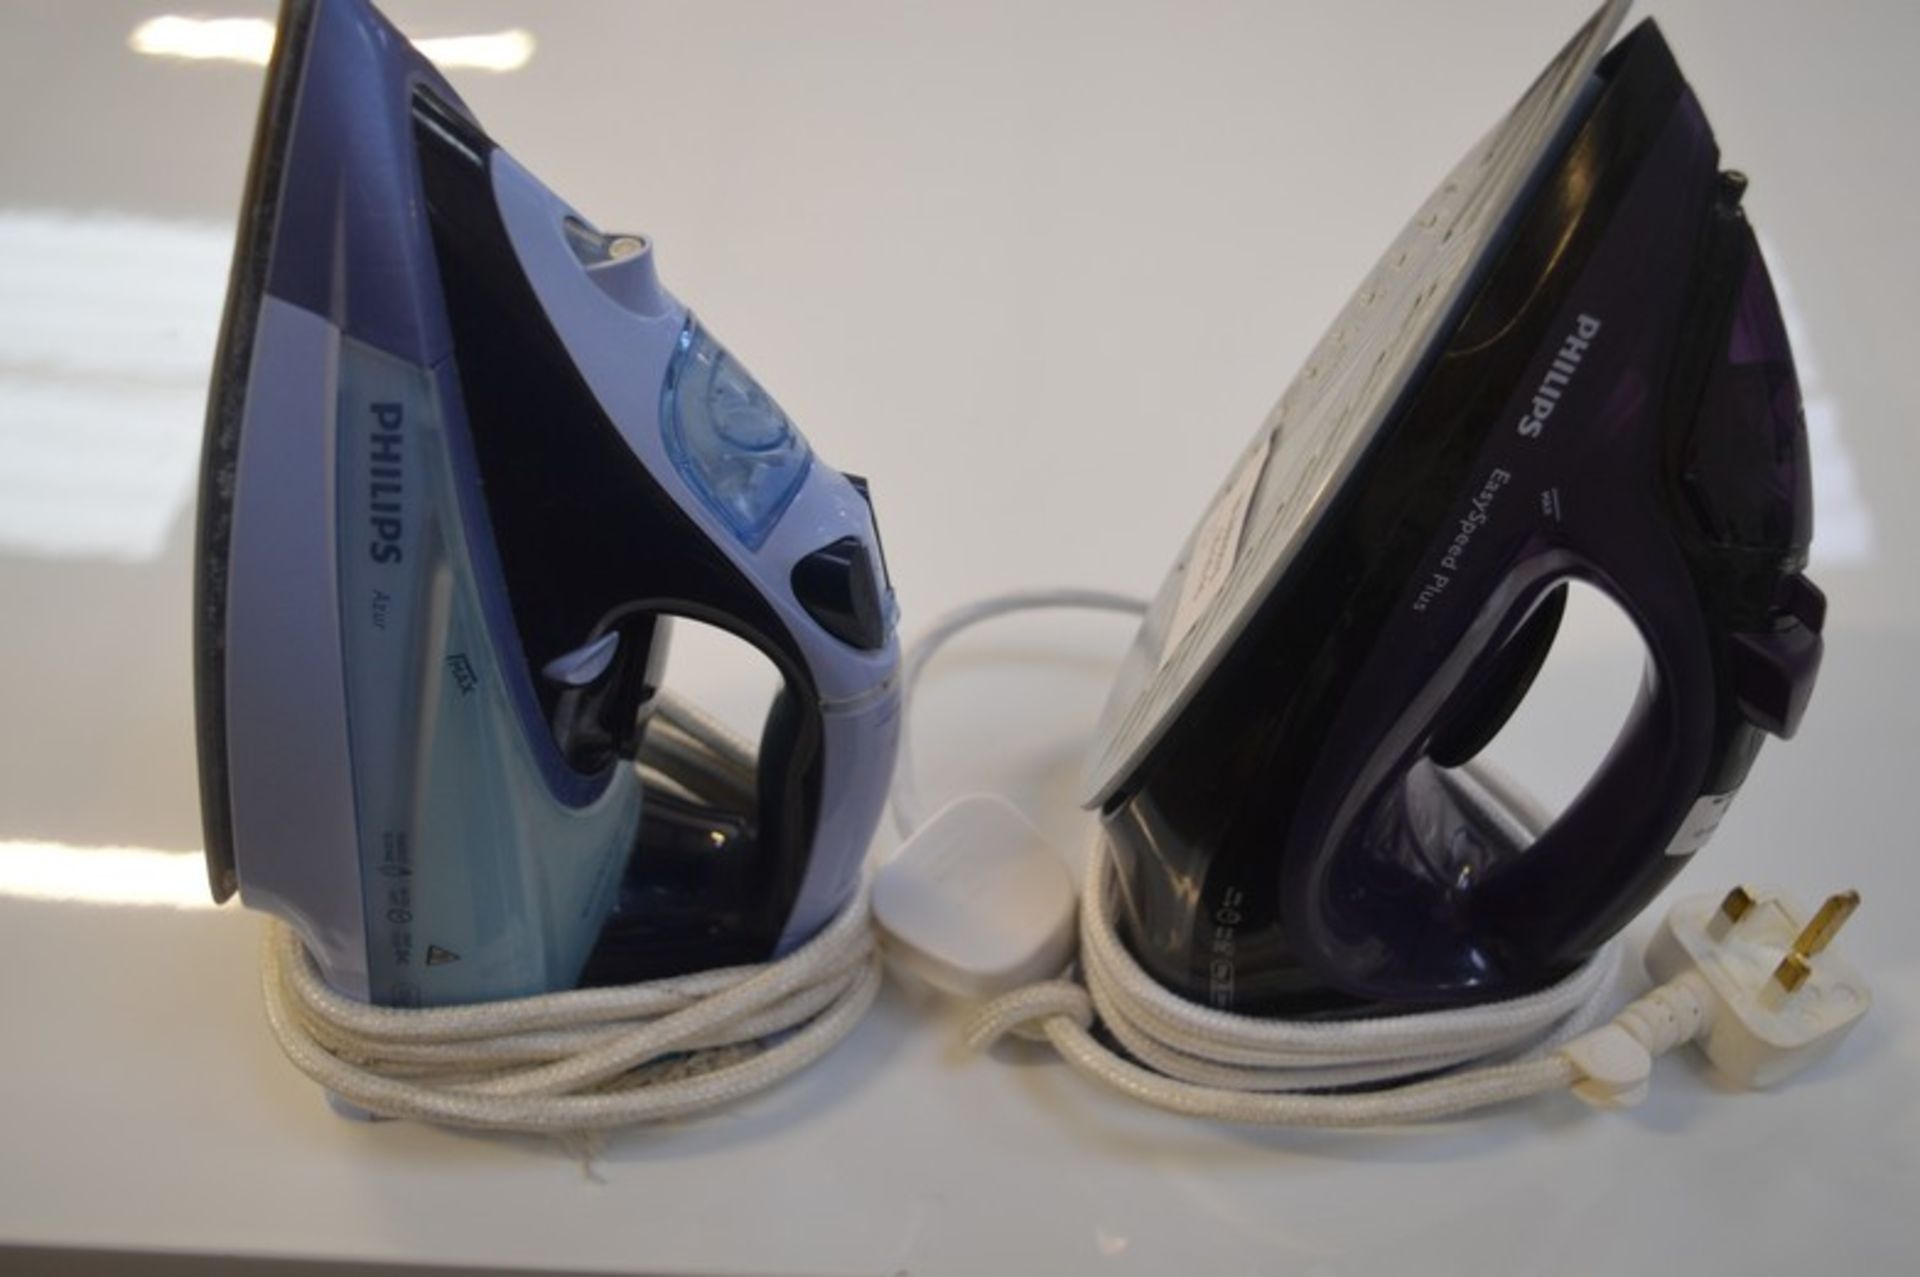 2 X ASSORTED STEAM IRONS BY PHILIPS COMBINED RRP £125.00 15/10/15